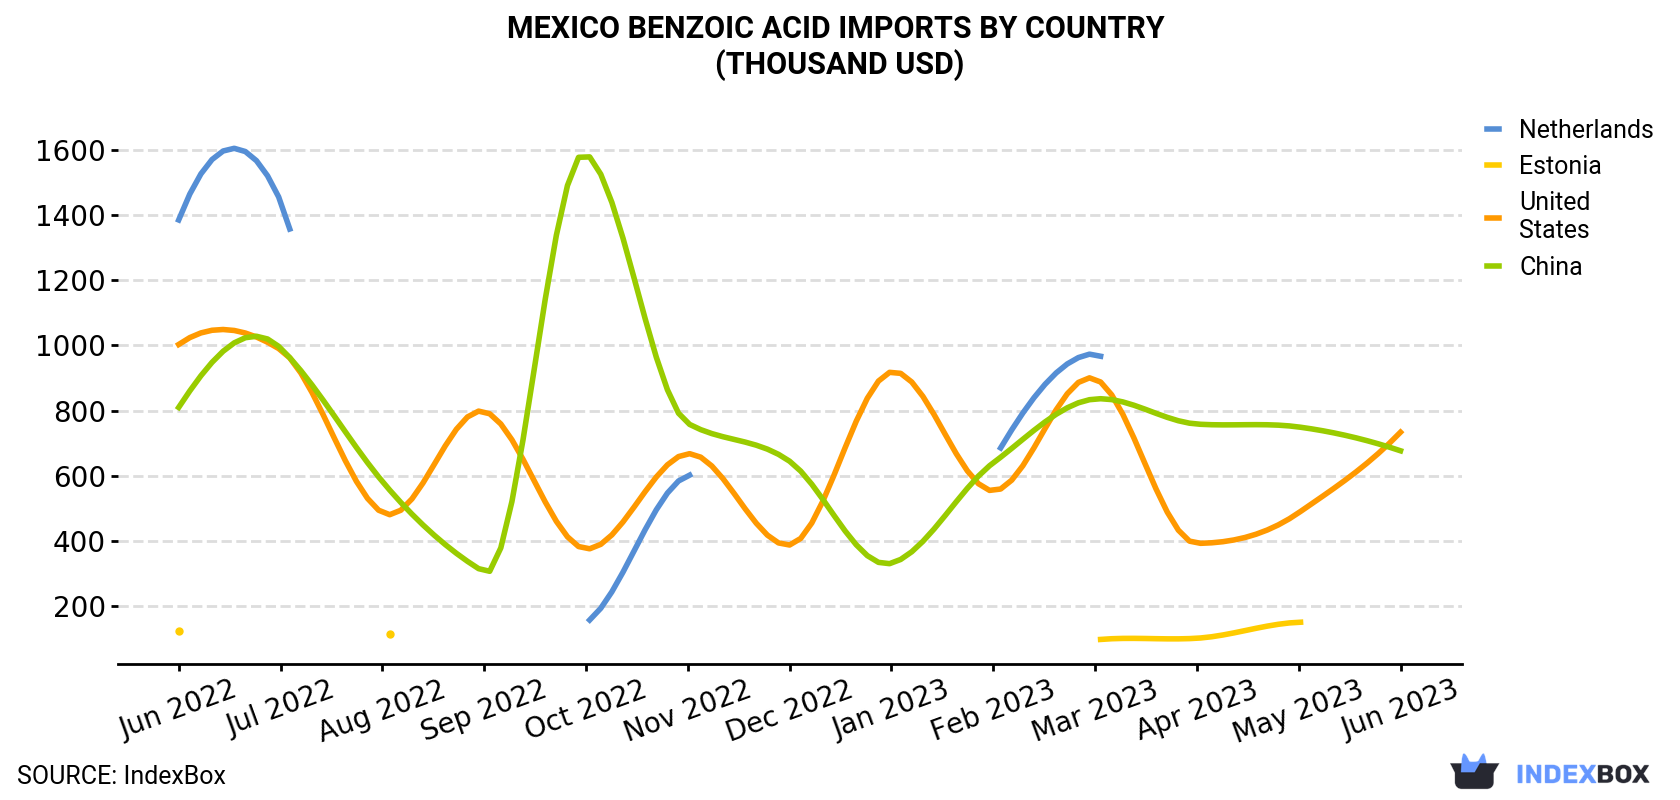 Mexico Benzoic Acid Imports By Country (Thousand USD)